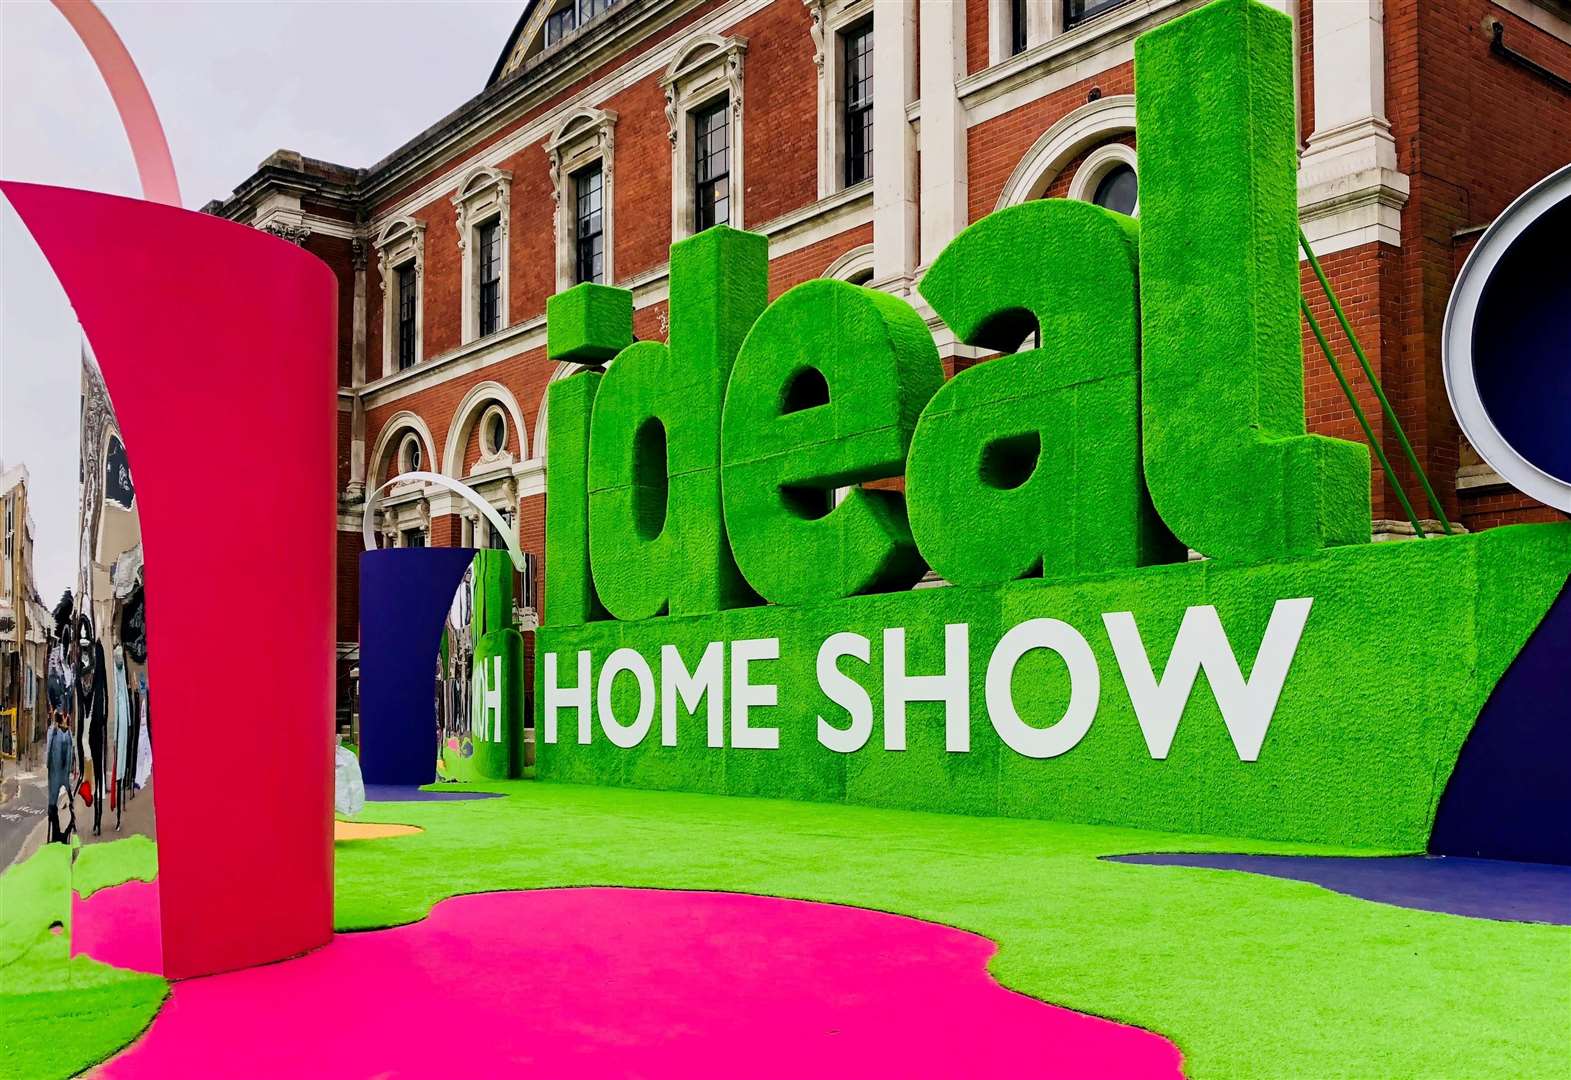 Claim free tickets to the Ideal Home Show with the KM Group's What's On